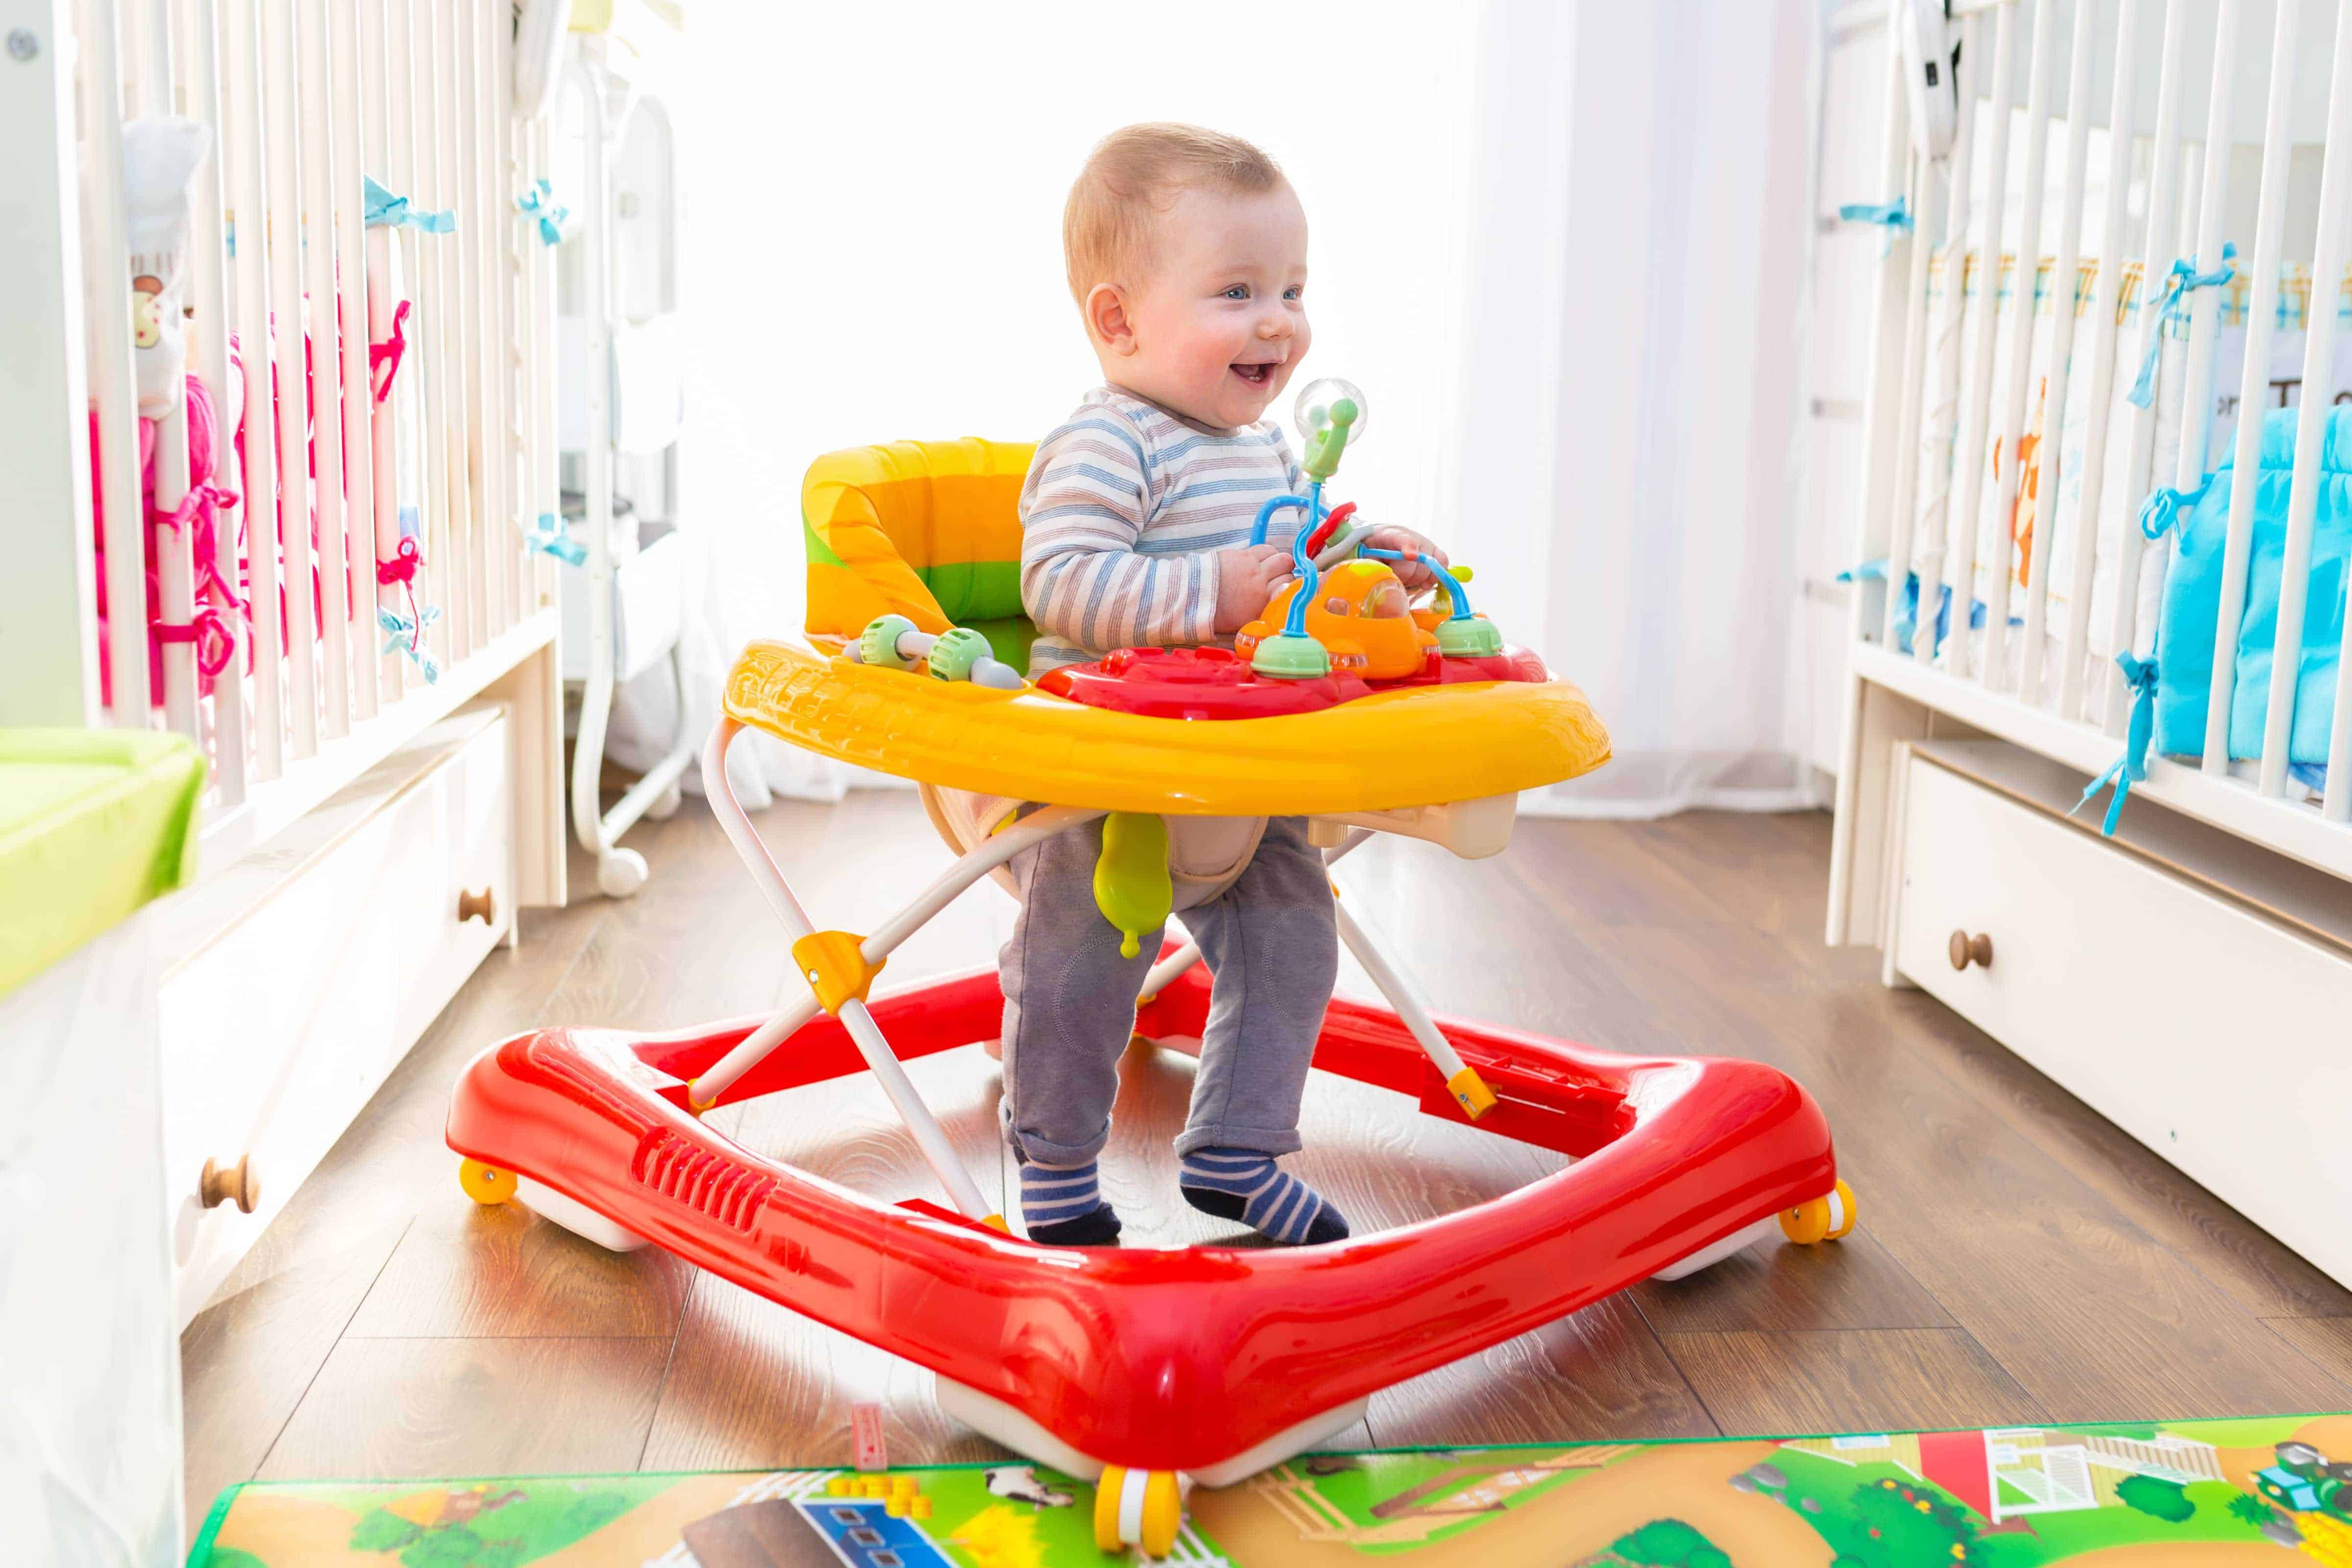 standing play stations for babies